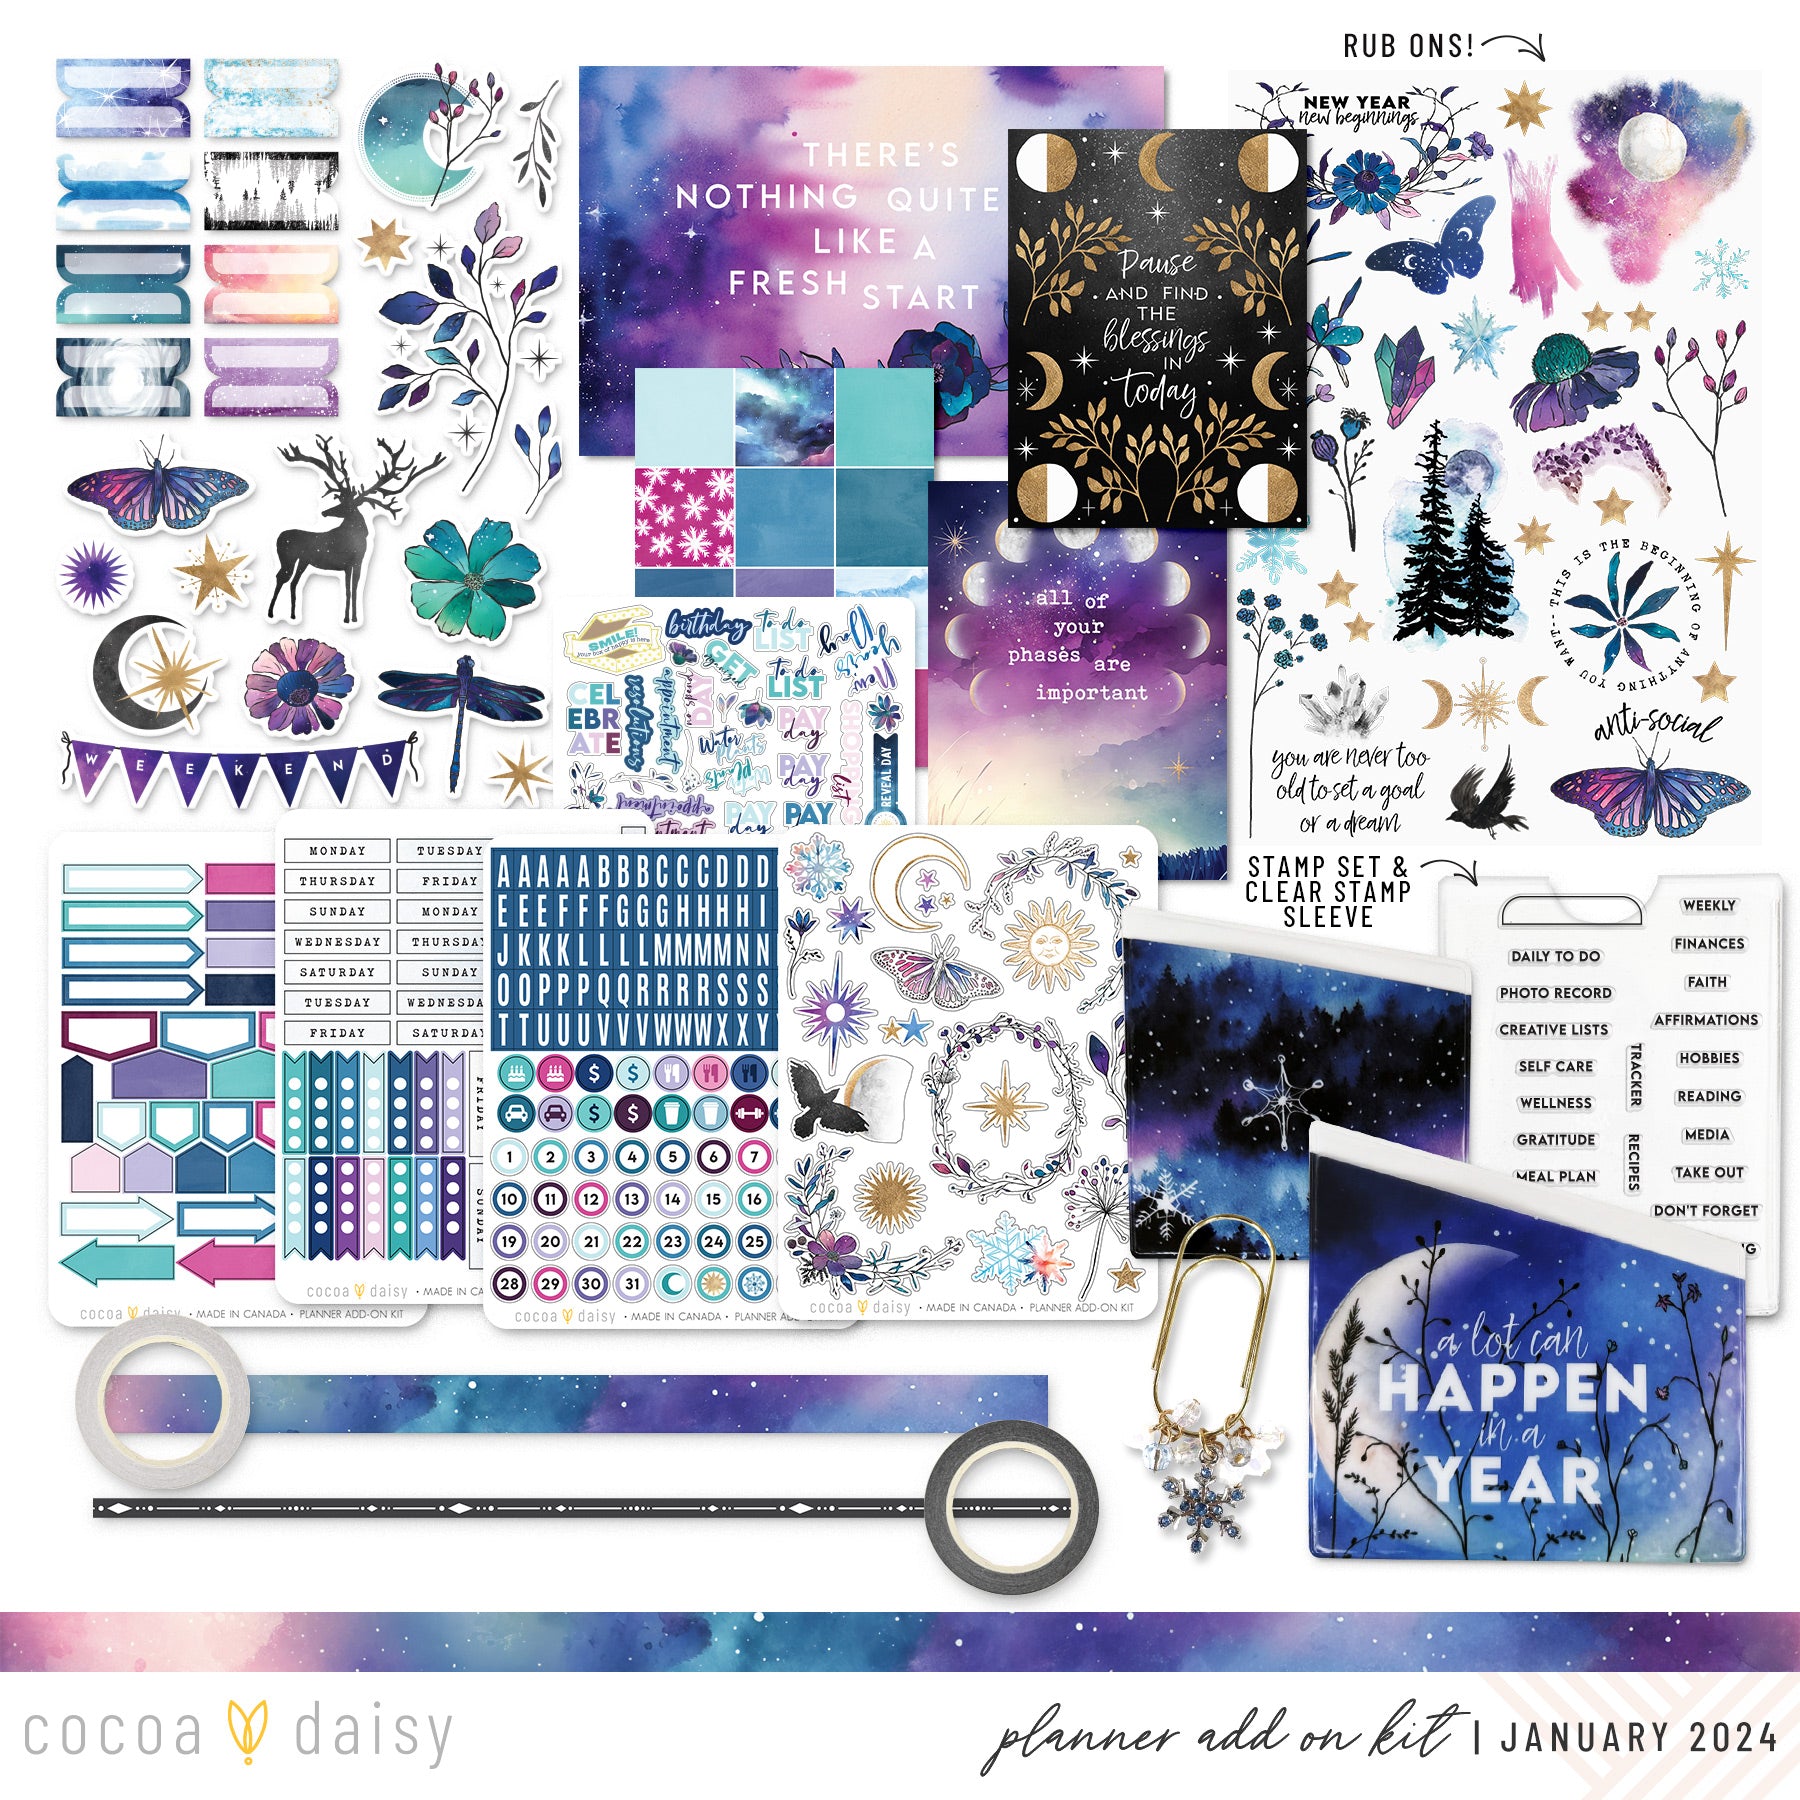 Silent Moon Planner Add On January 2024